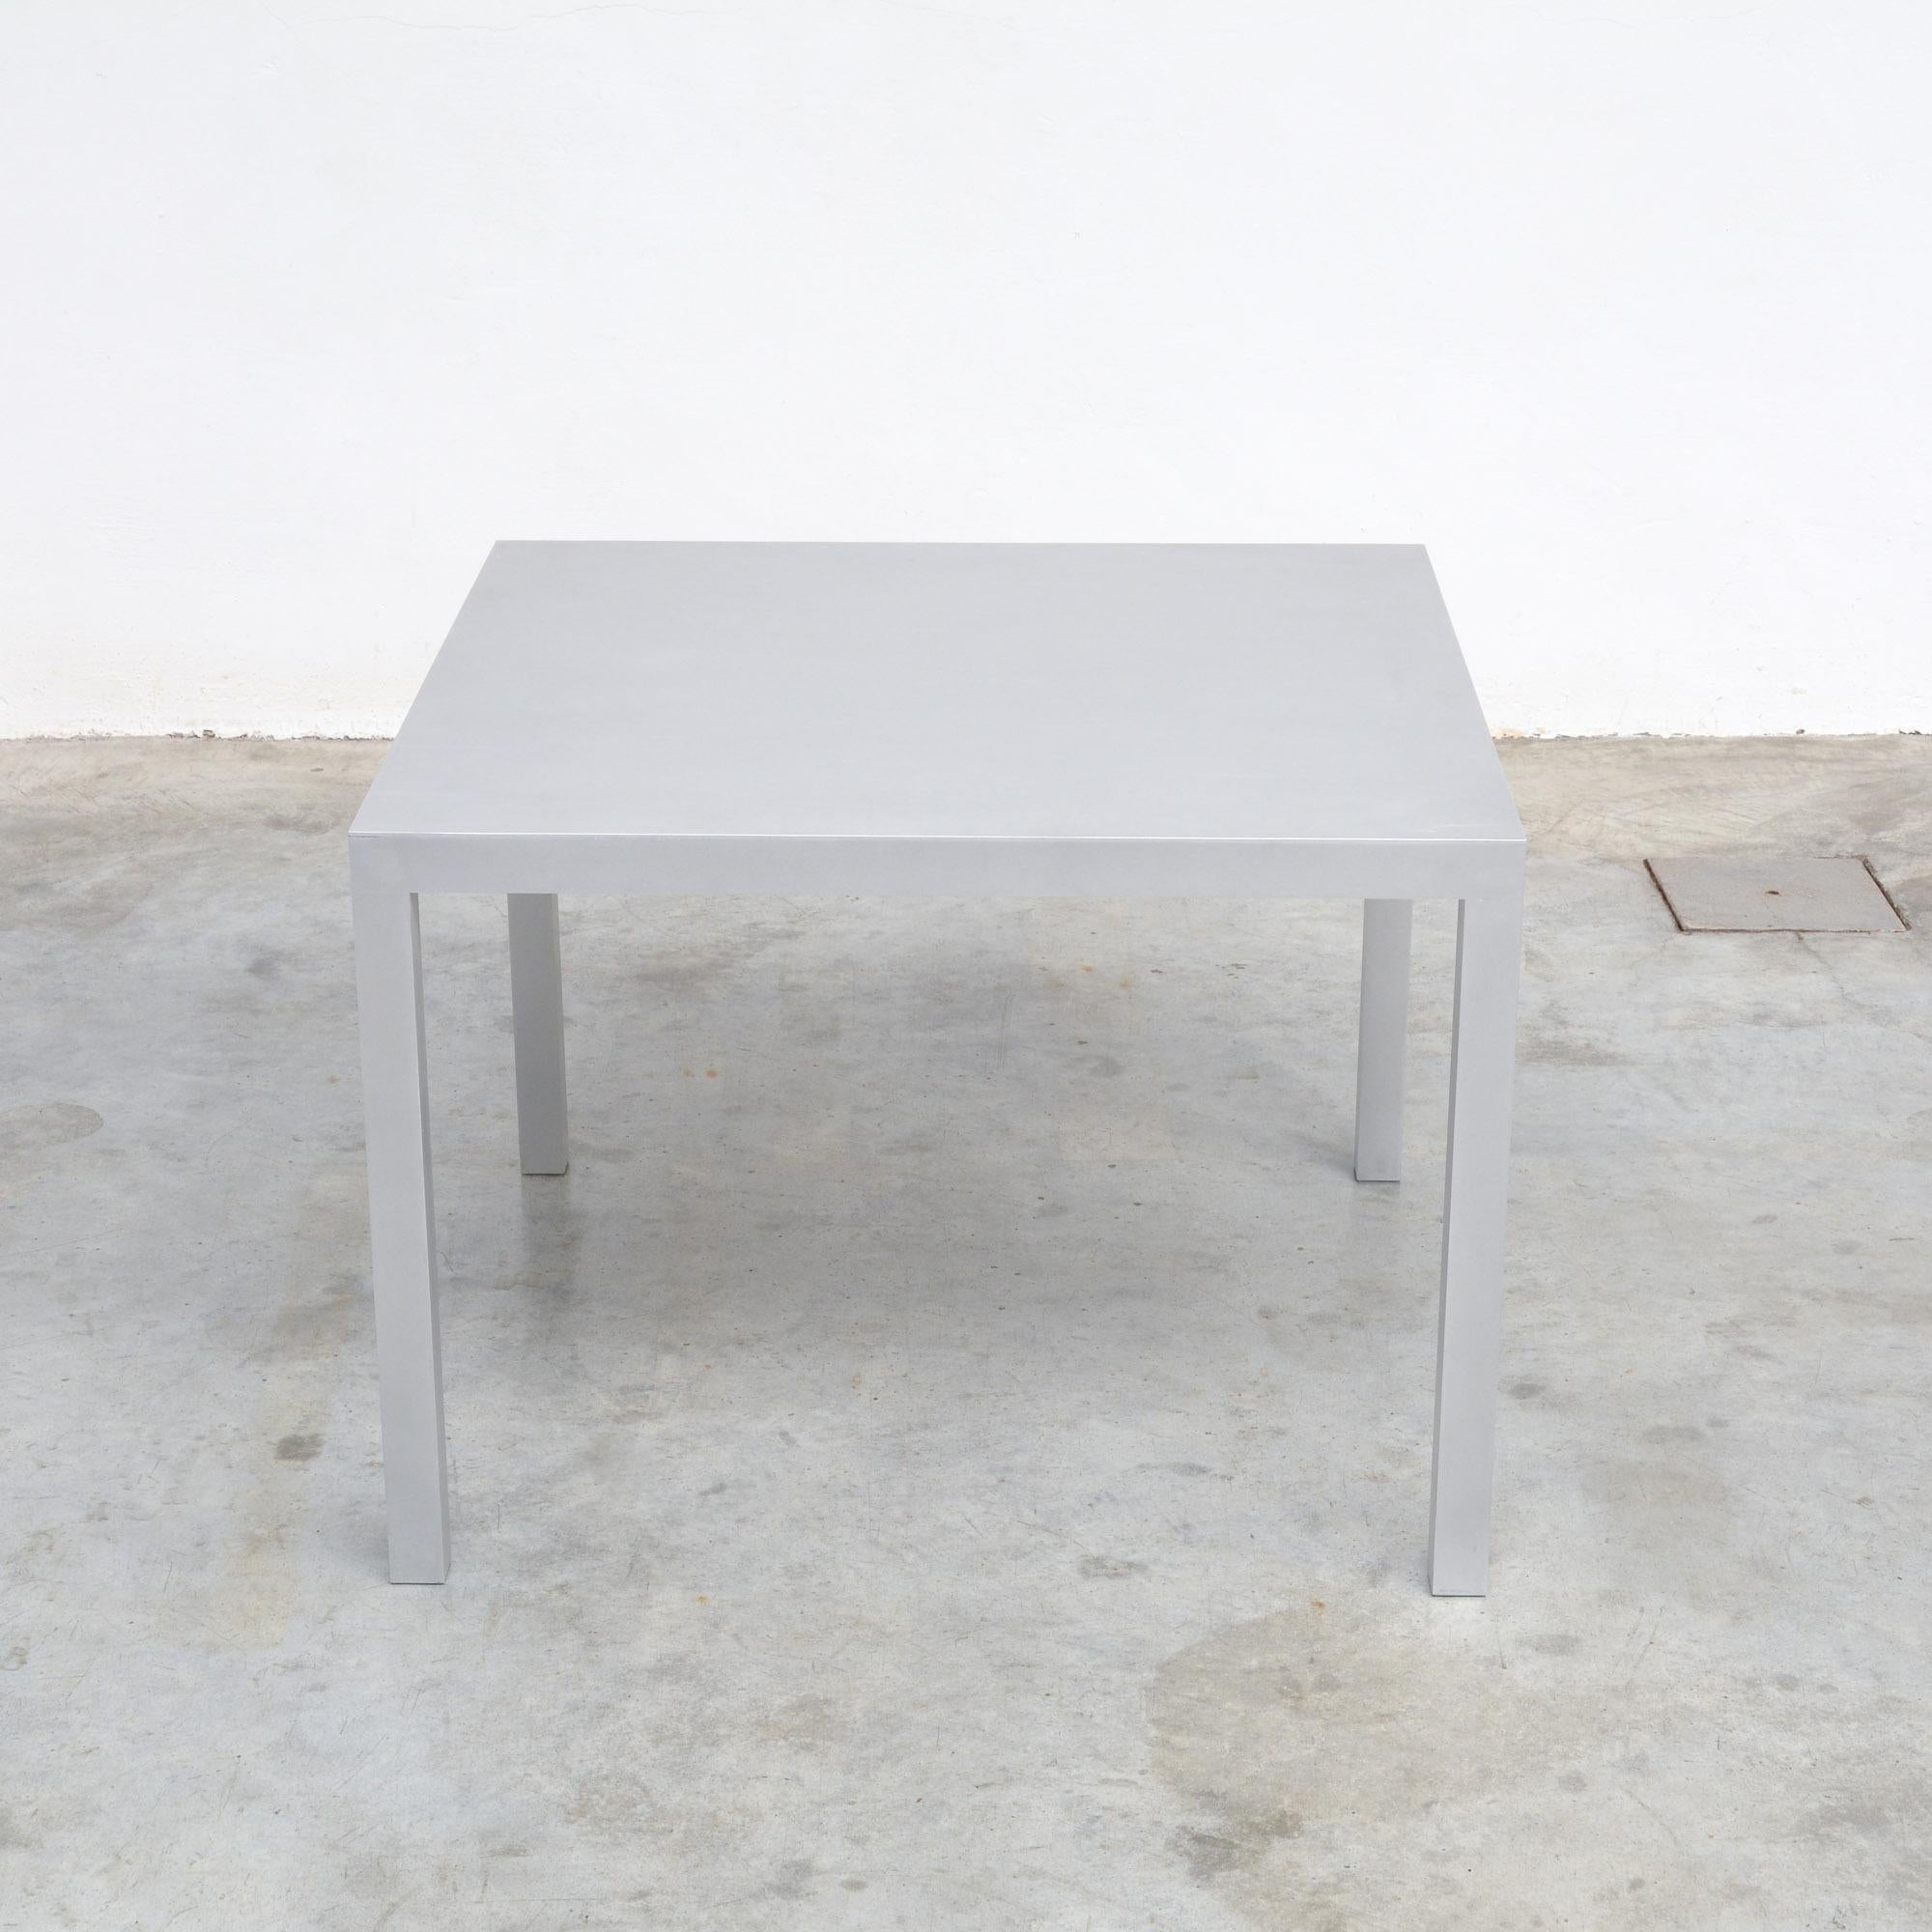 The aluminum square table T88A was designed by Maarten Van Severen in 1988. This is an early production of his own workshop or an early edition of Top-Mouton, it is difficult to recognize the difference.
This aluminum table was used intensively,